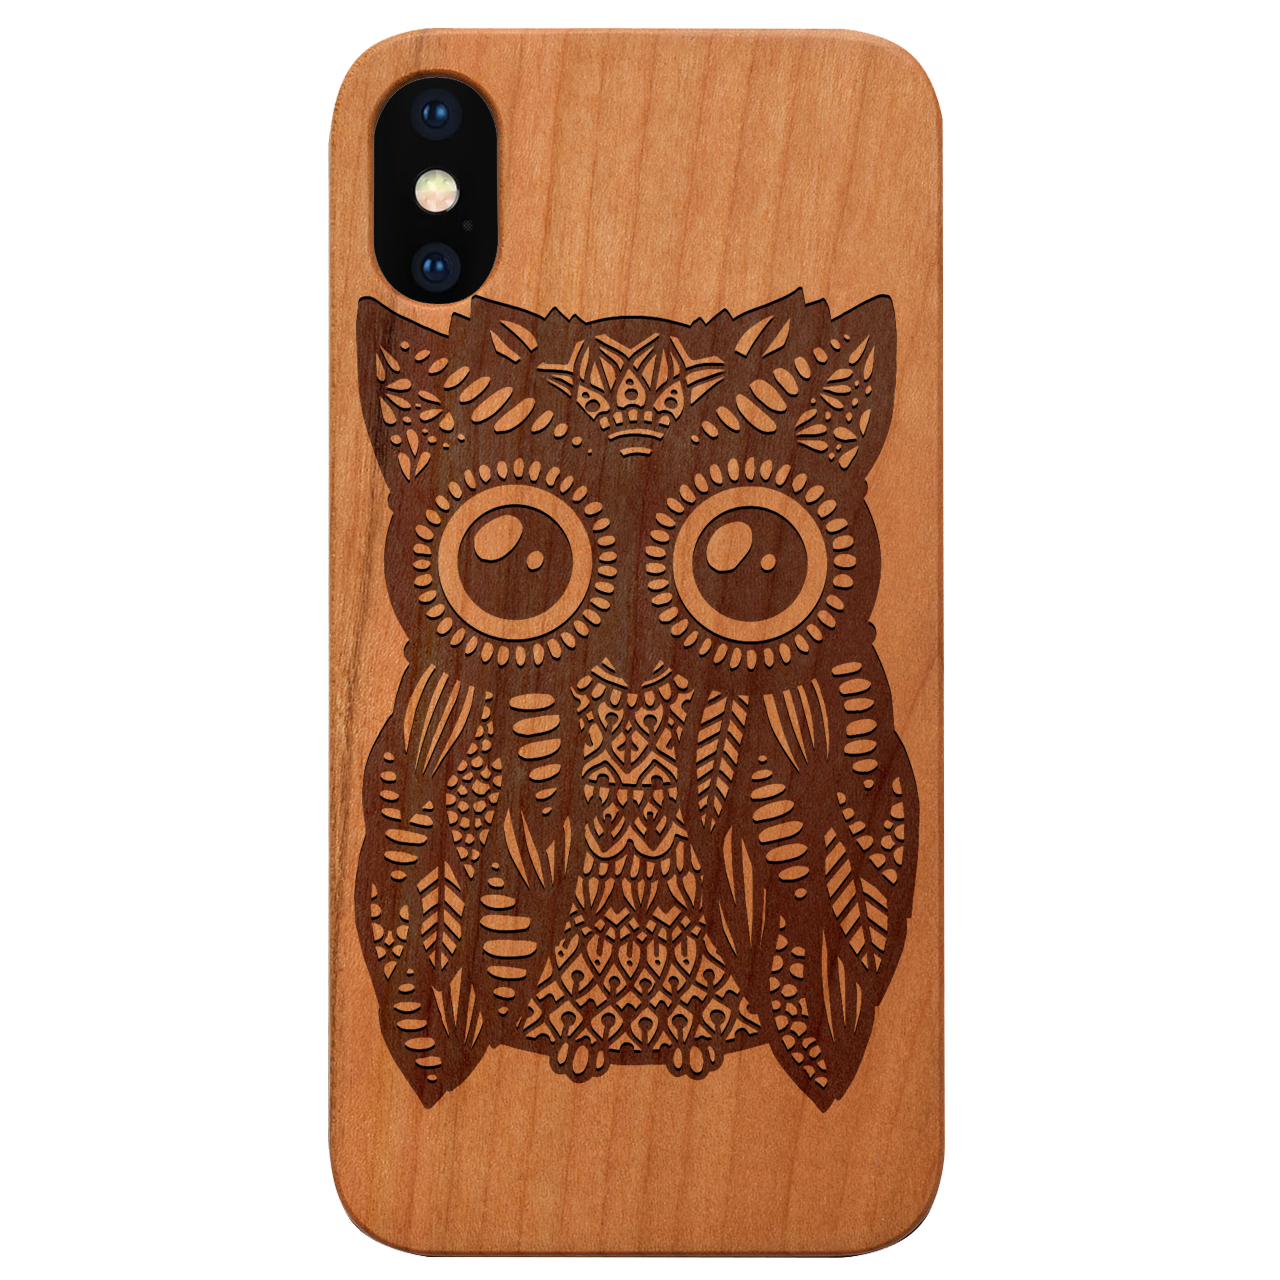 Great Owl - Engraved